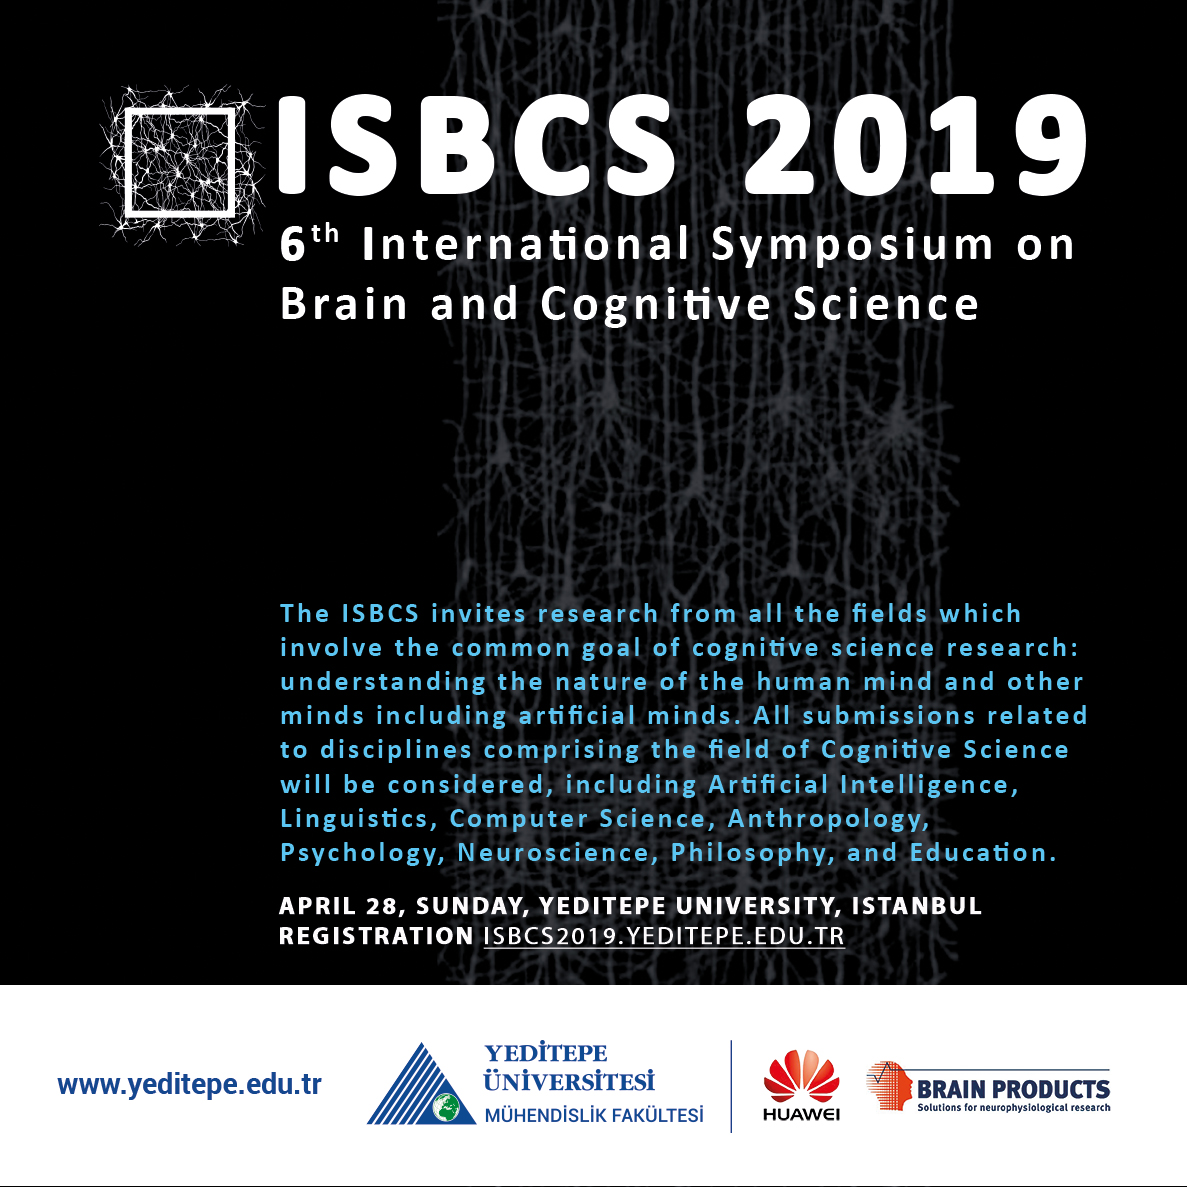 6. International Symposium on Brain and Cognitive Science (ISBCS)